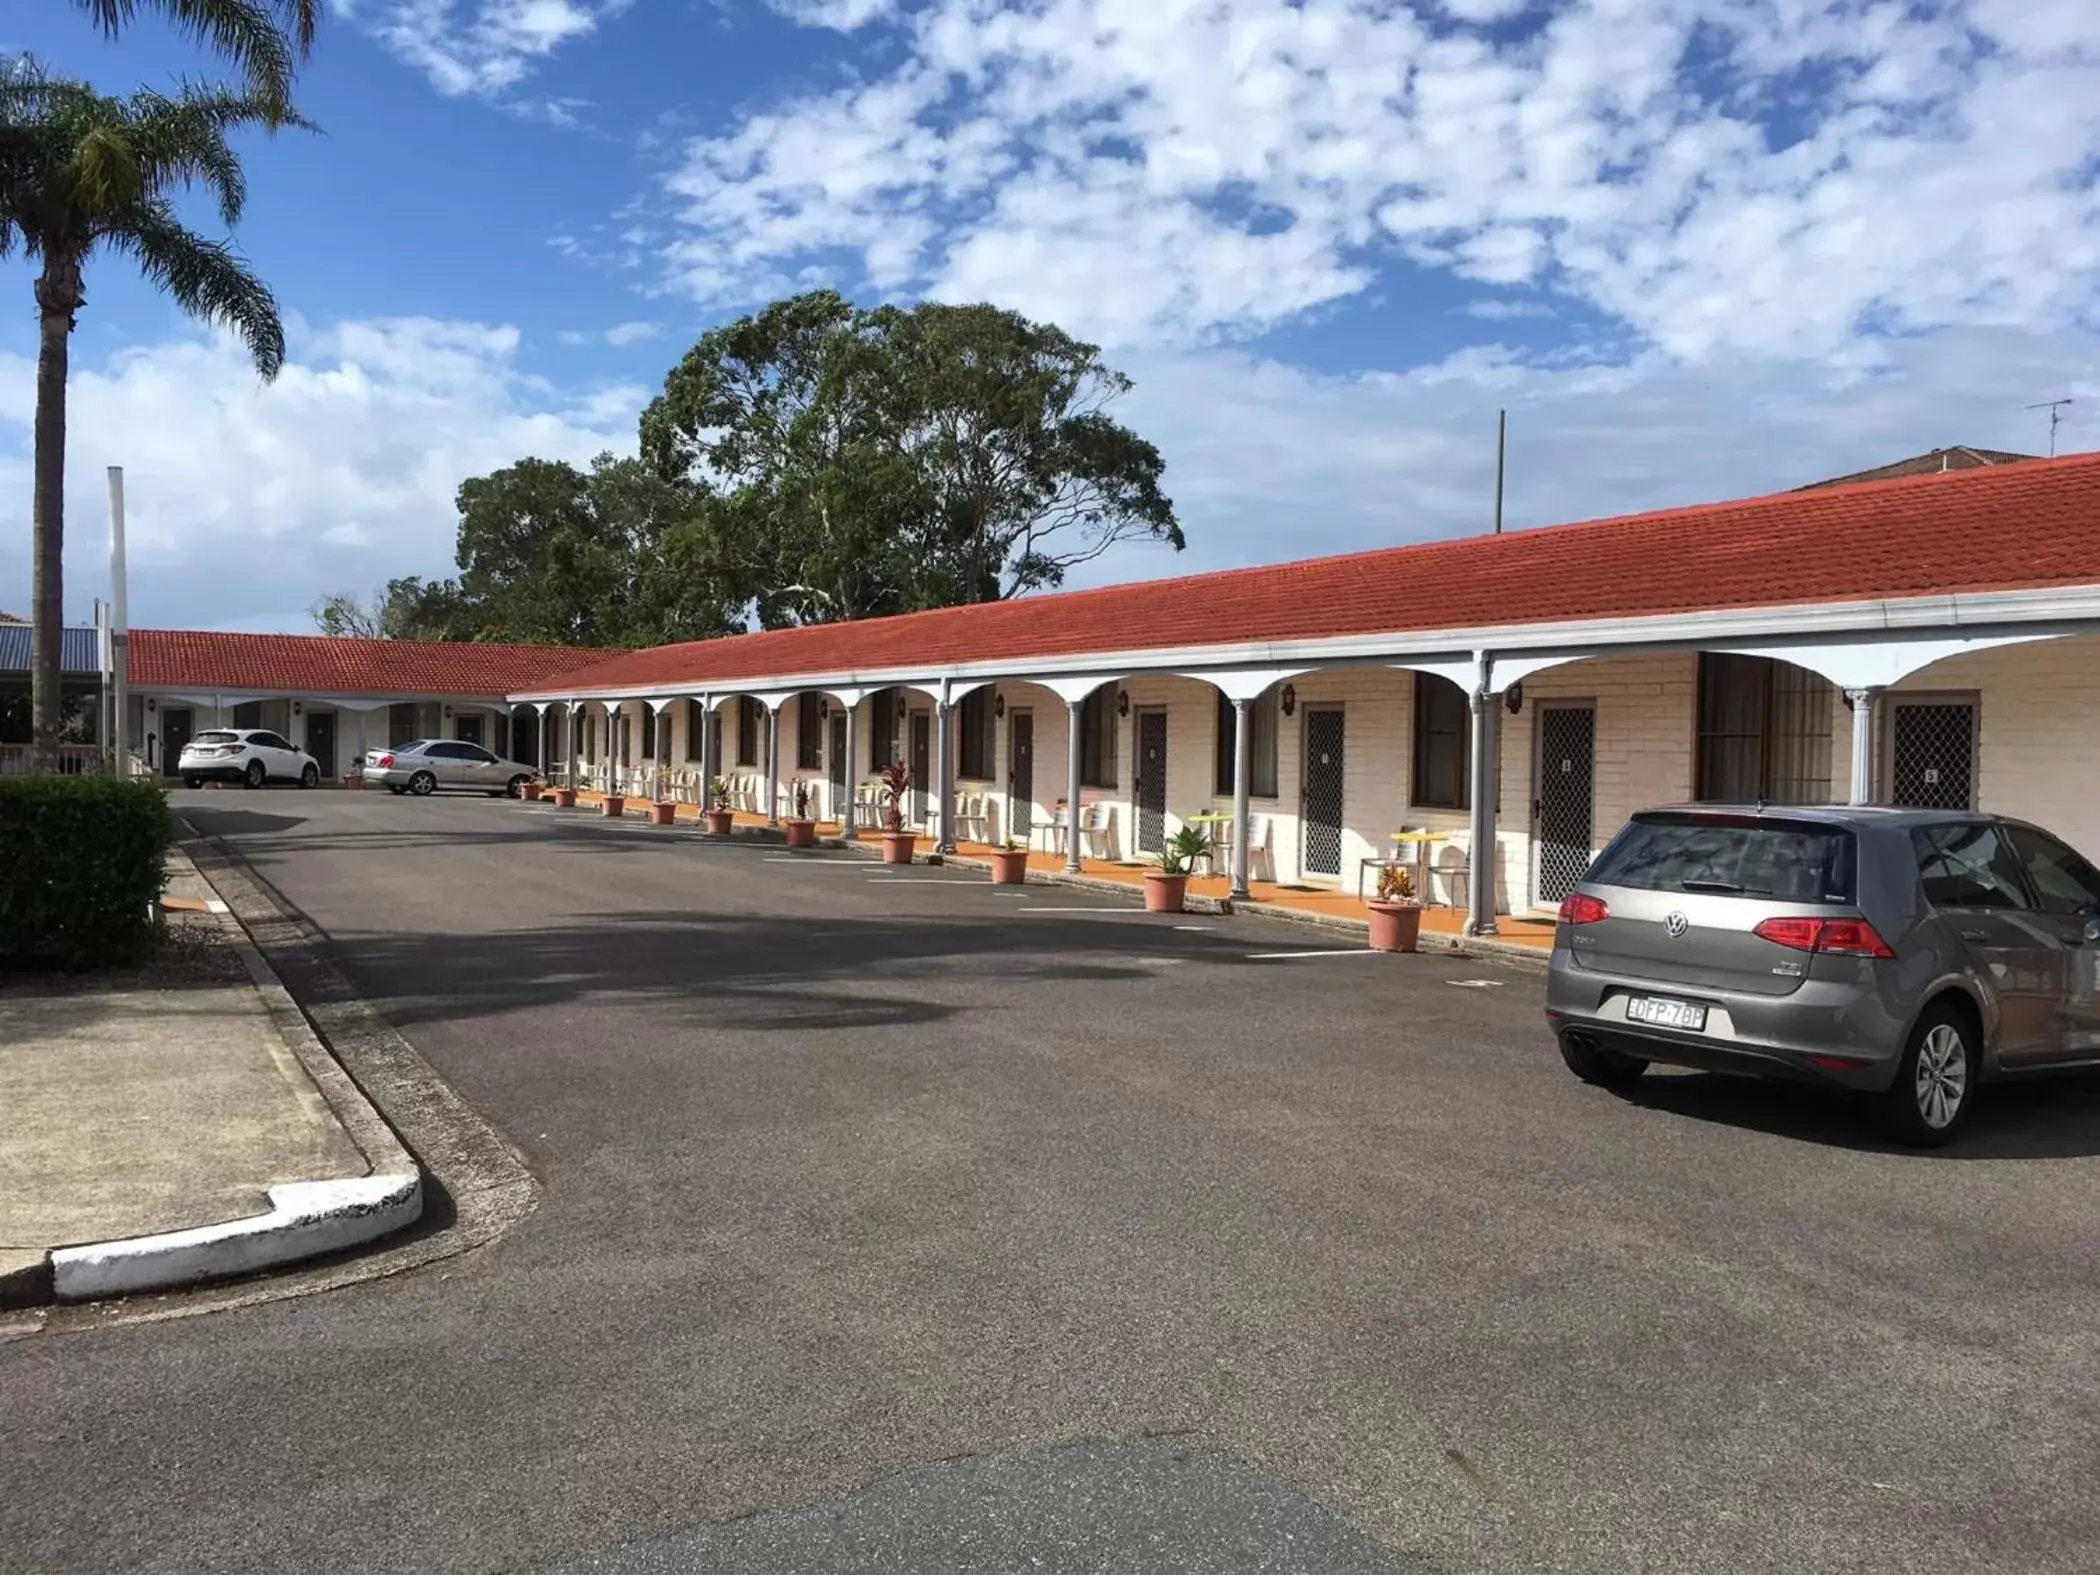 Property Building in Tuncurry Beach Motel